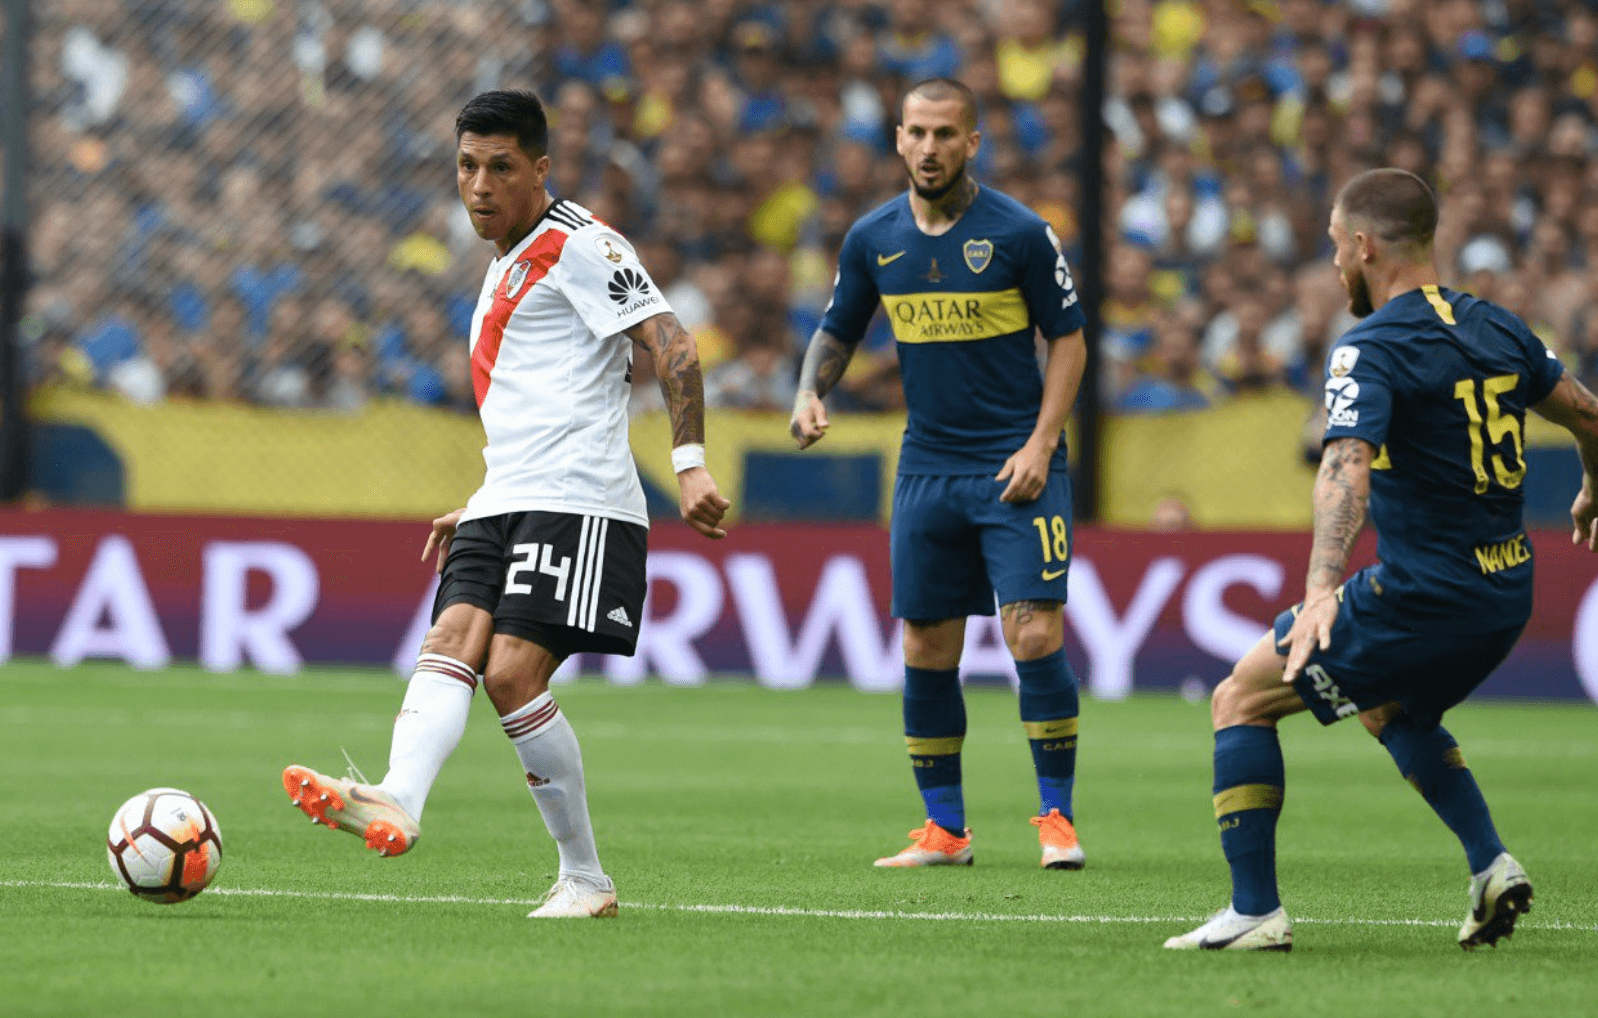 River Plate and Boca Juniors tie in first leg of all-Argentina Libertadores final